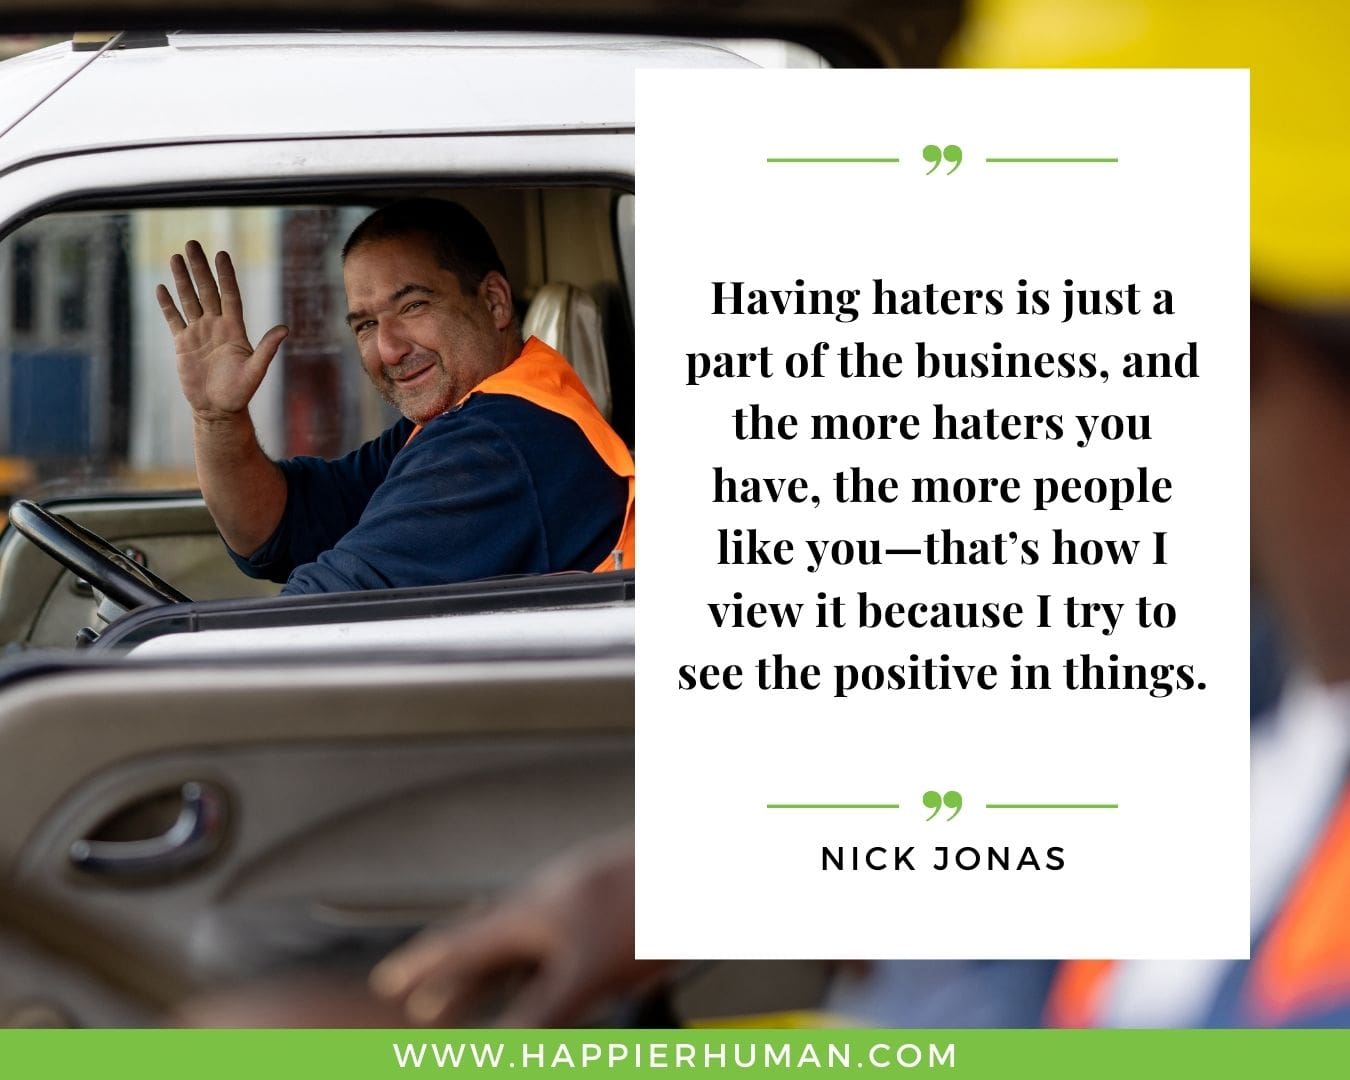 Haters Quotes - “Having haters is just a part of the business, and the more haters you have, the more people like you—that’s how I view it because I try to see the positive in things.” - Nick Jonas